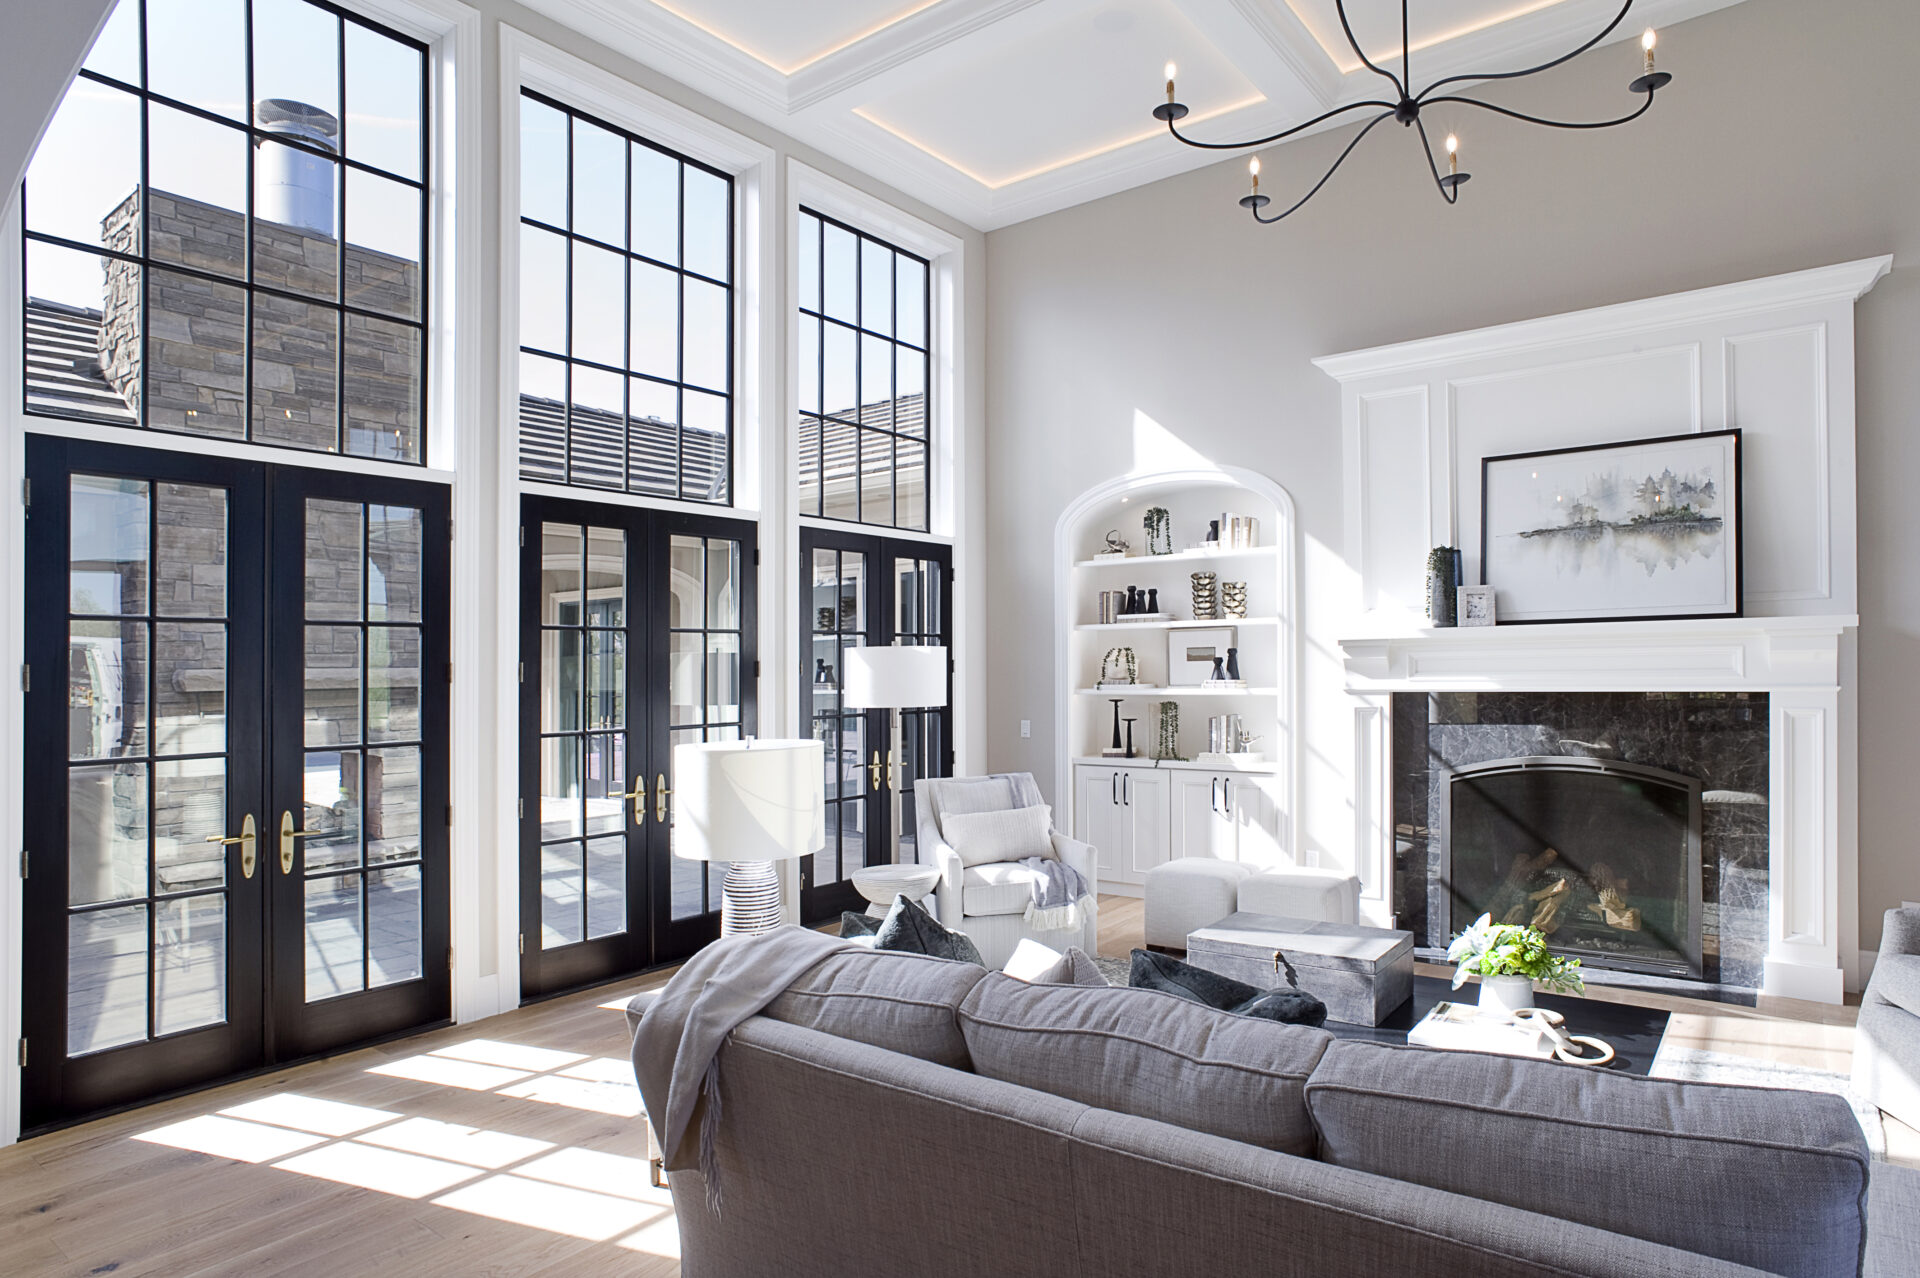 Interior living room with tall windows